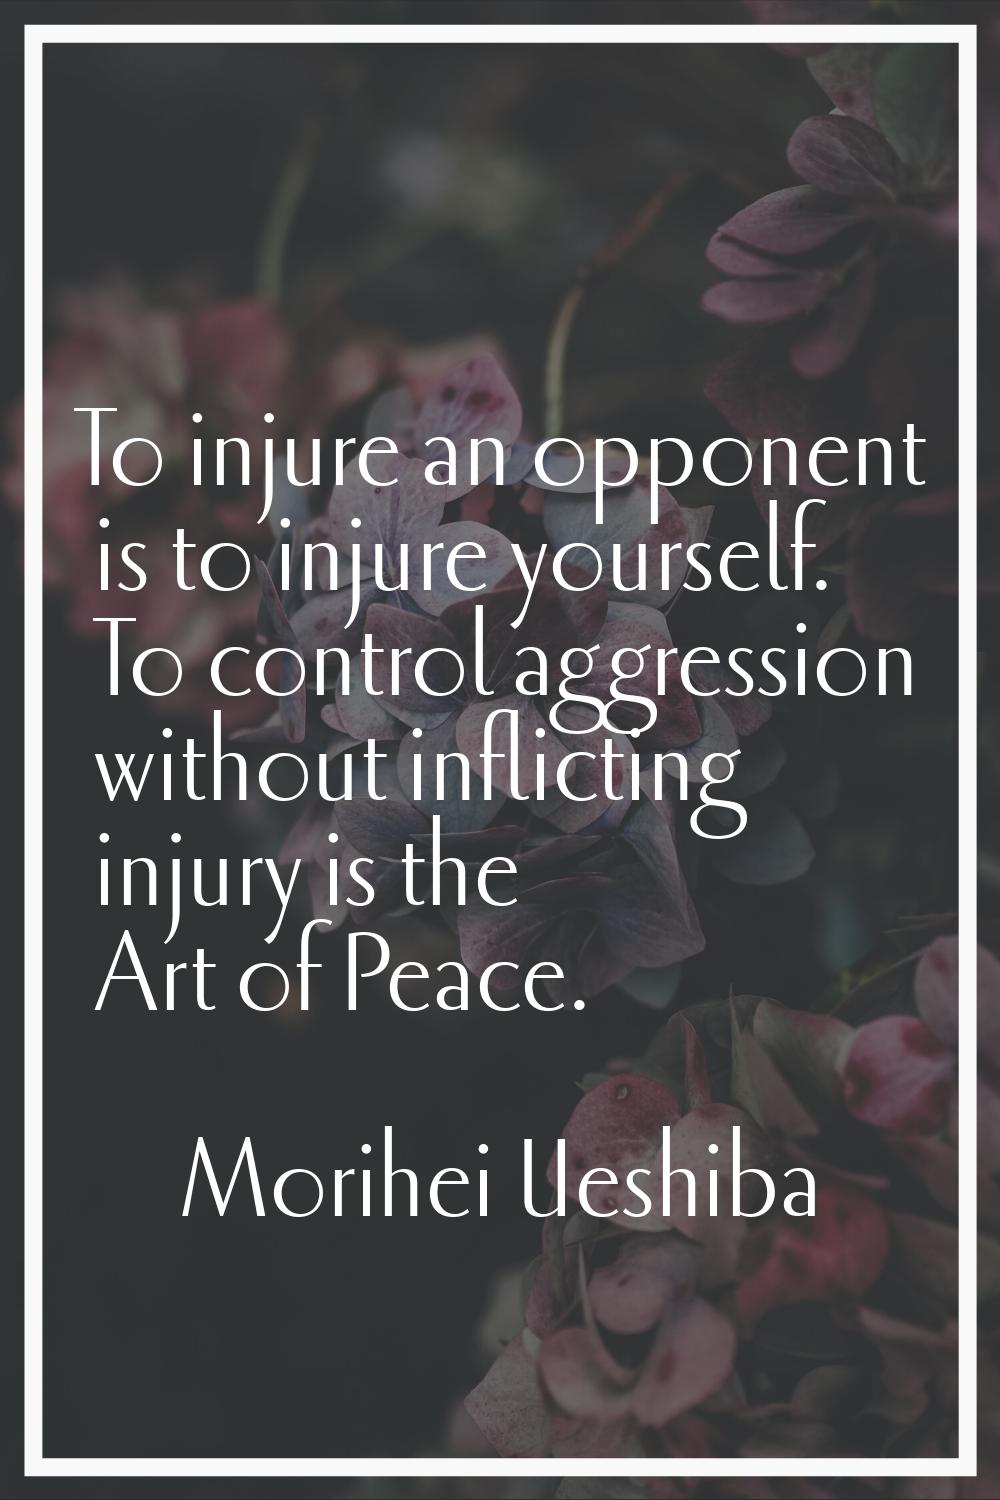 To injure an opponent is to injure yourself. To control aggression without inflicting injury is the